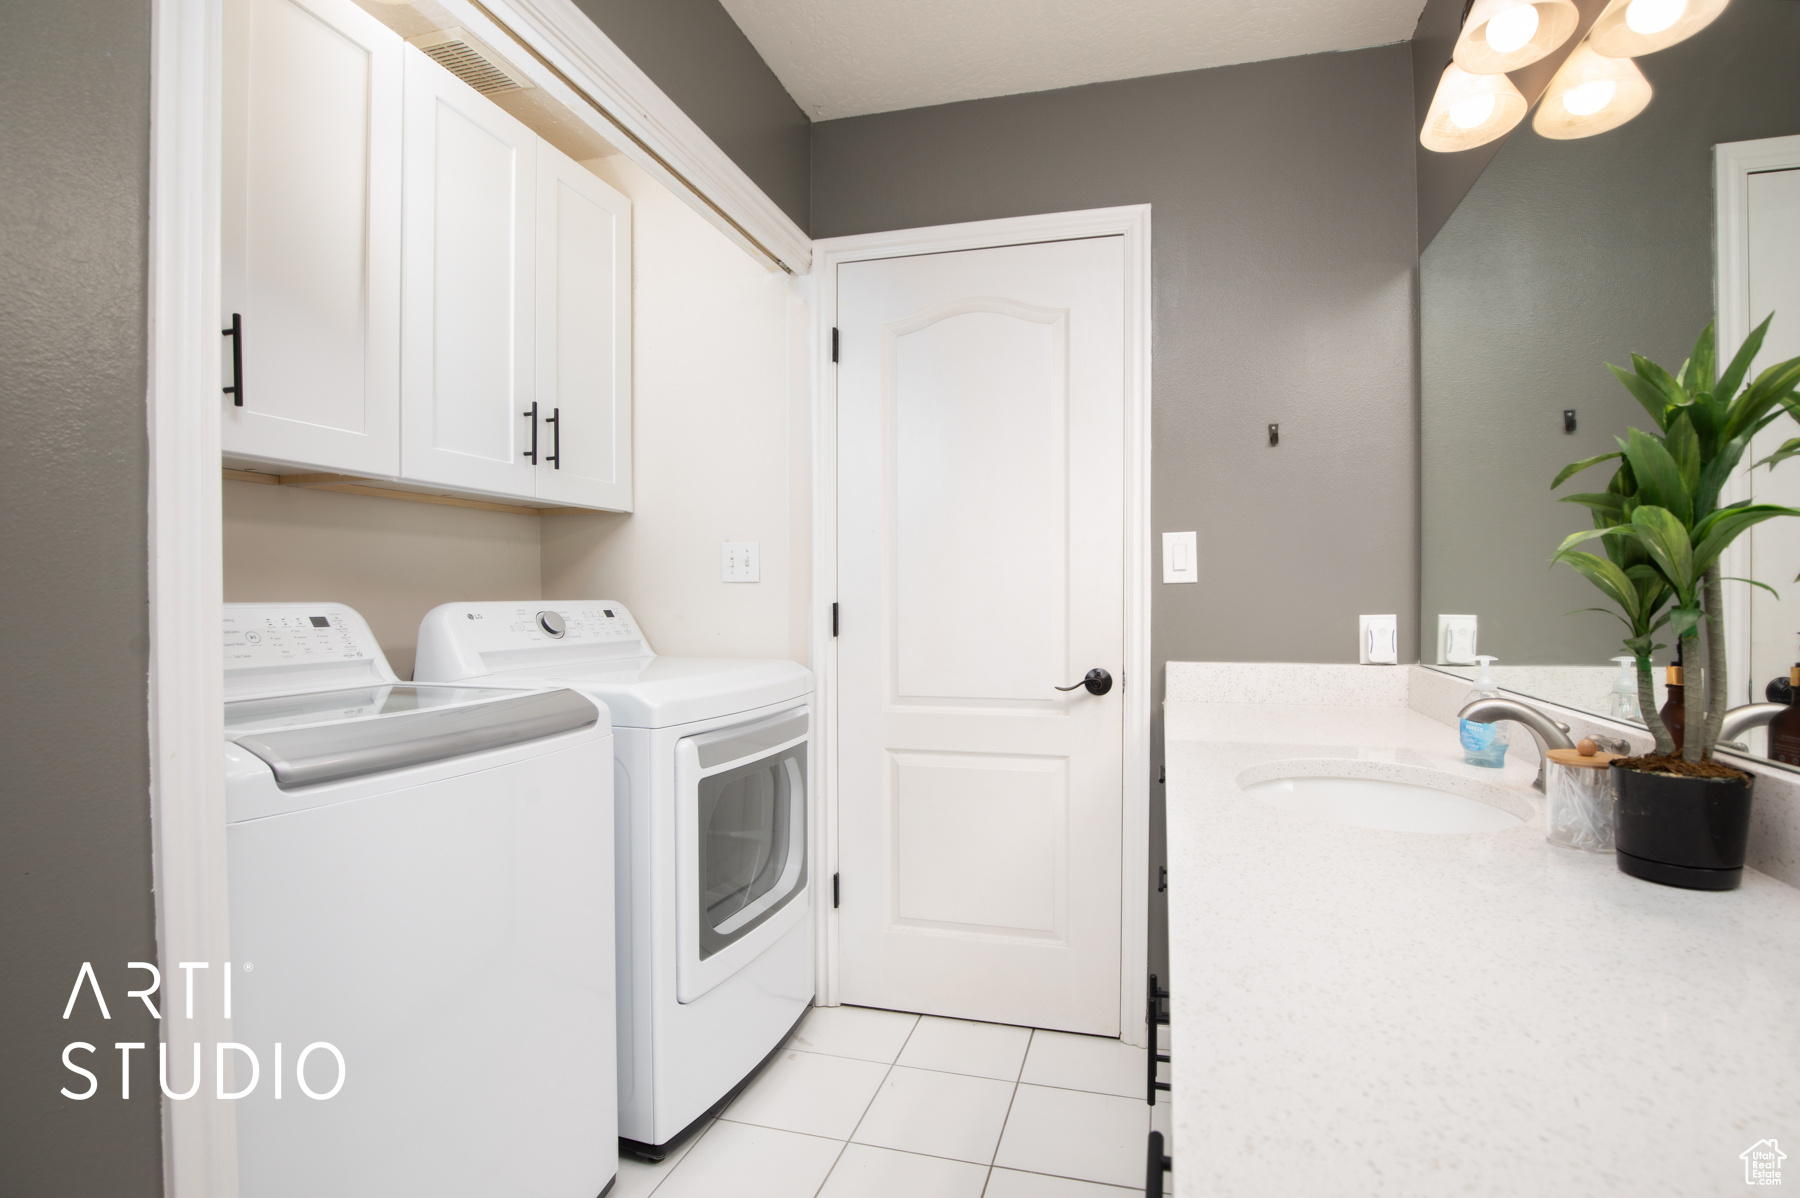 Laundry with sink, washing machine and dryer, light tile floors, and new cabinets